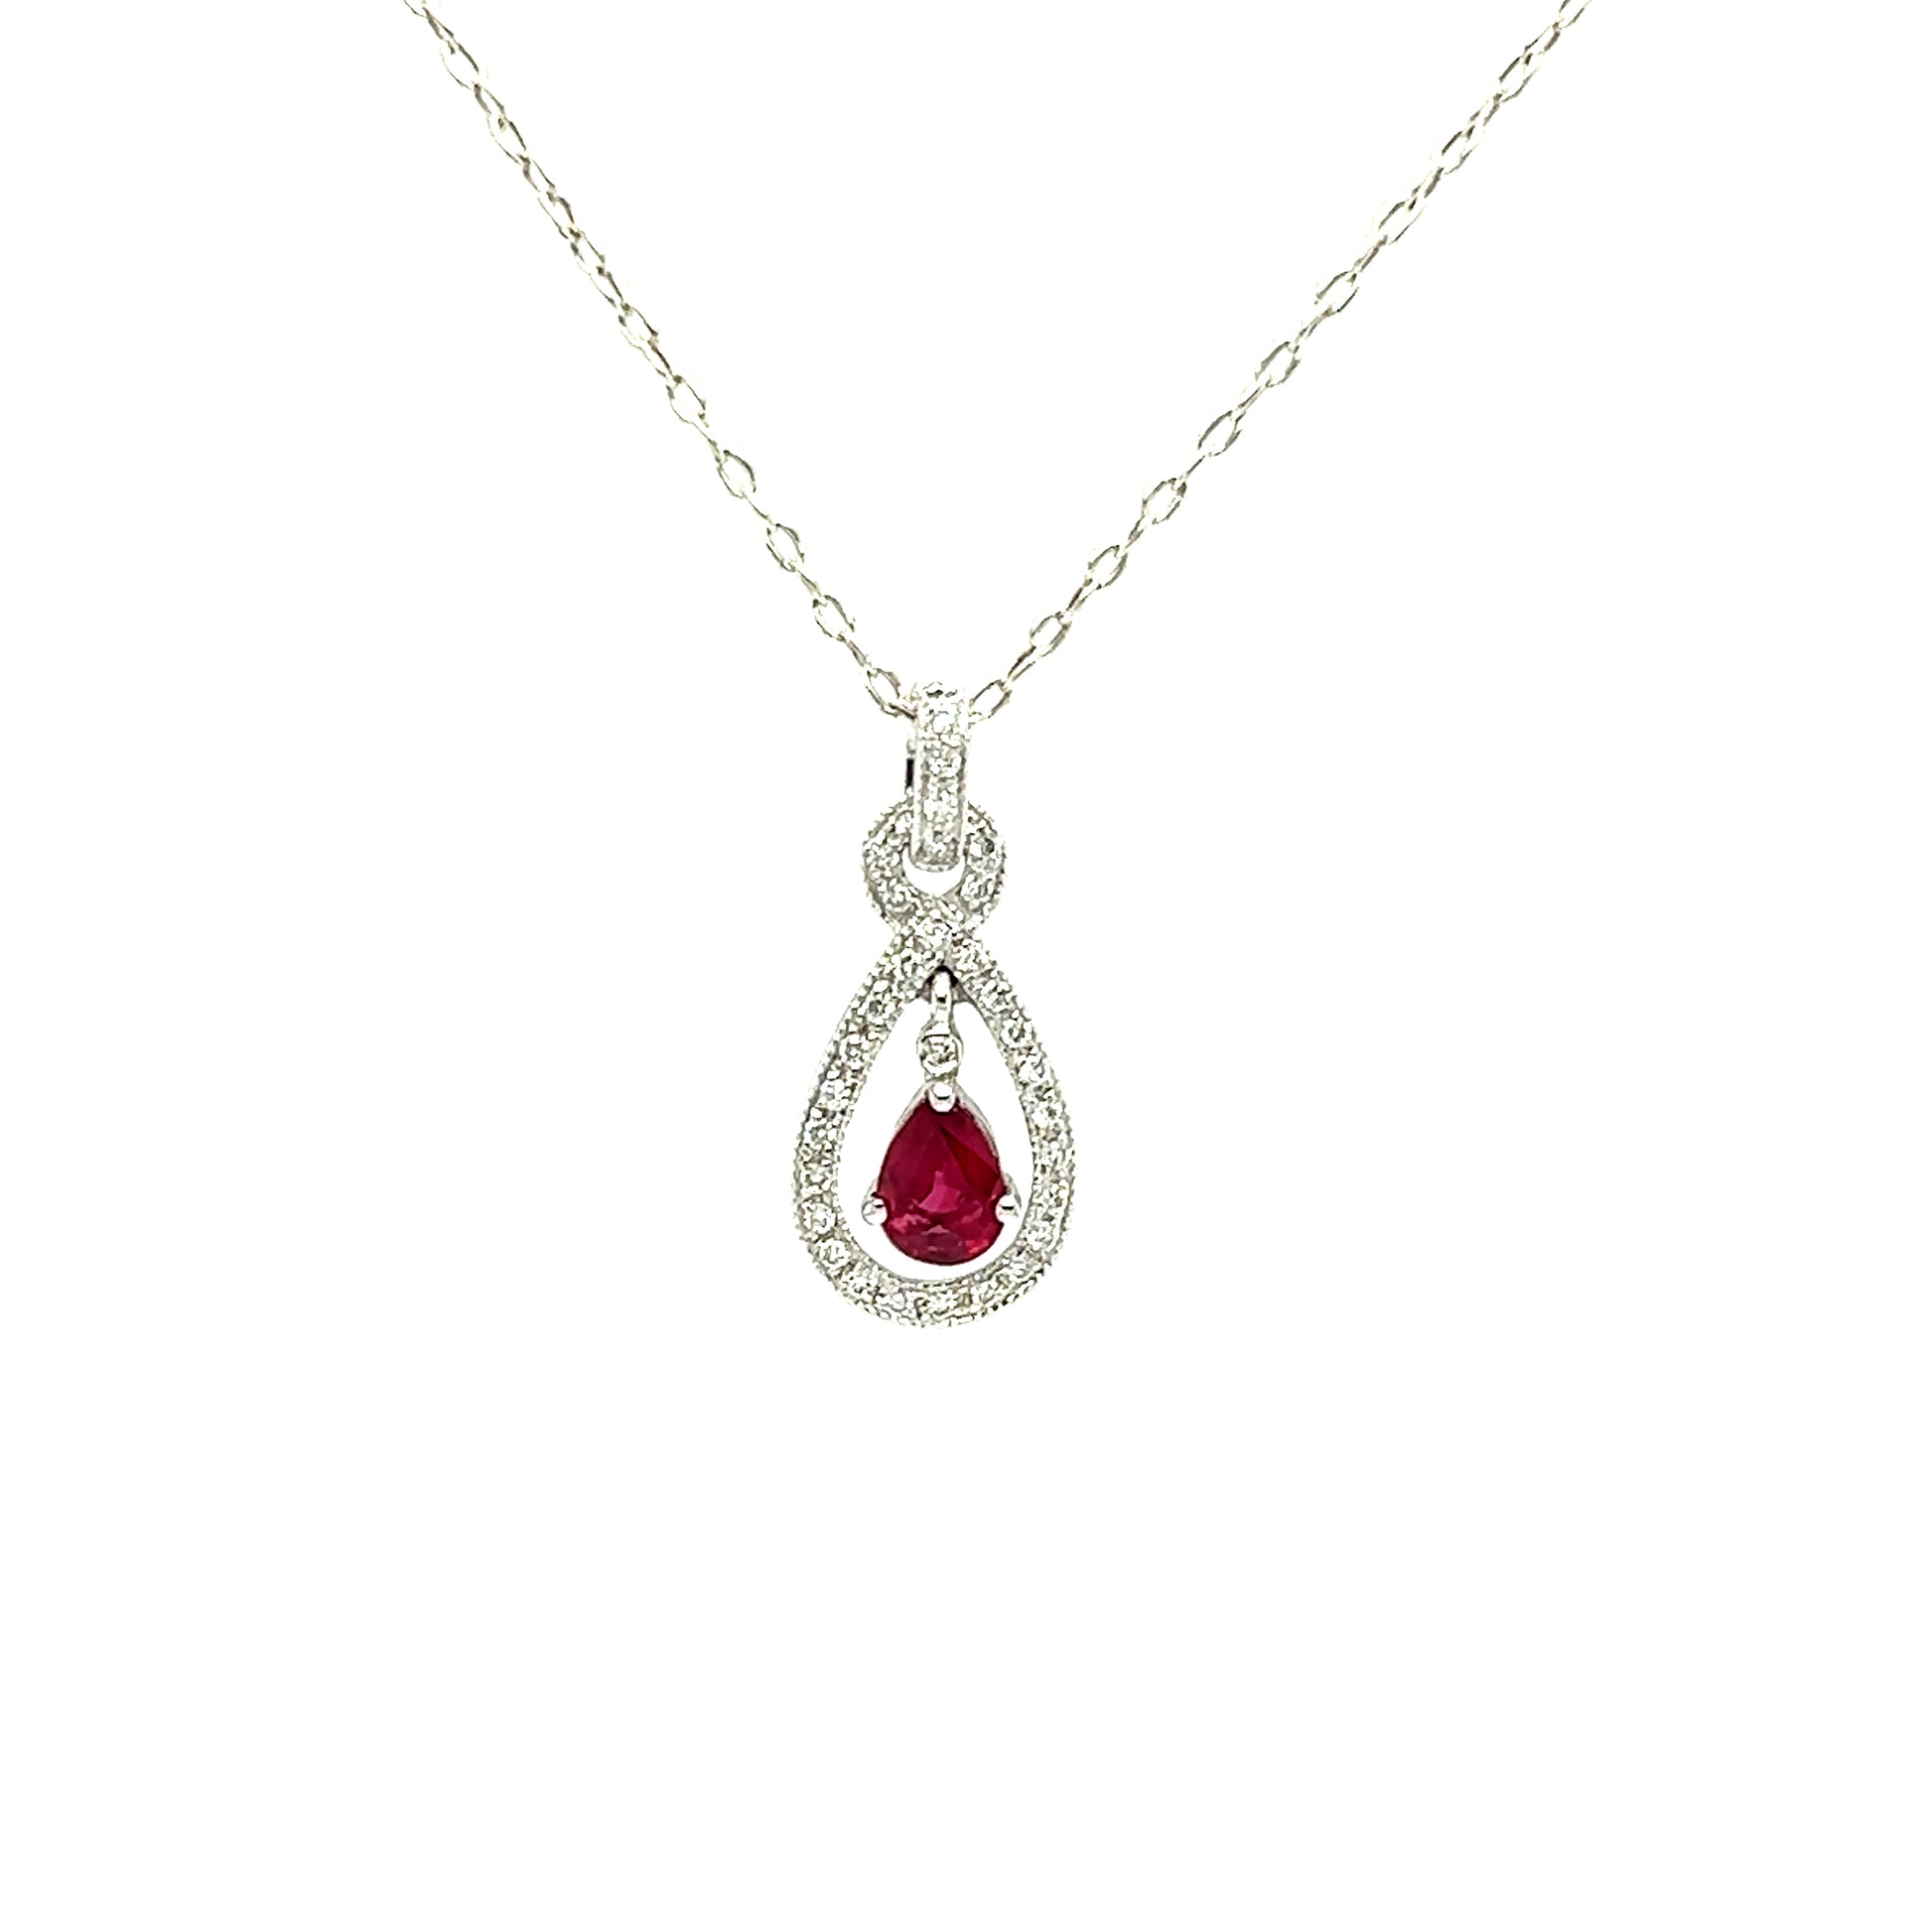 Dangling Pear Ruby Pendant with Diamond Accents in 14K White Gold Pendant on Chain Front View